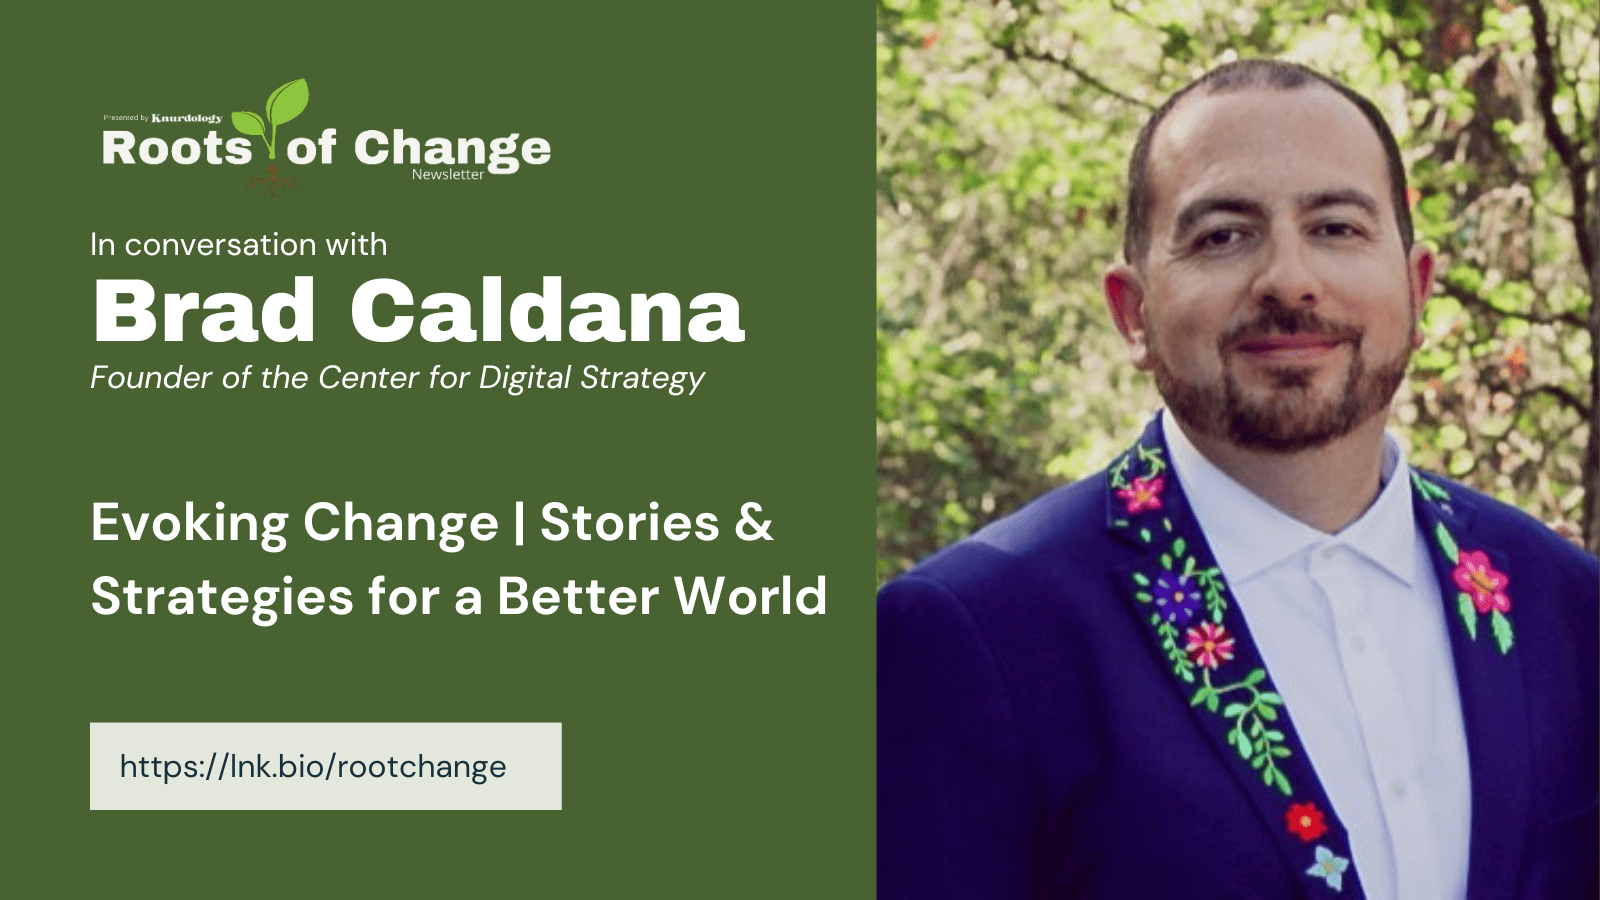 Roots of Change interview with Brad Caldana